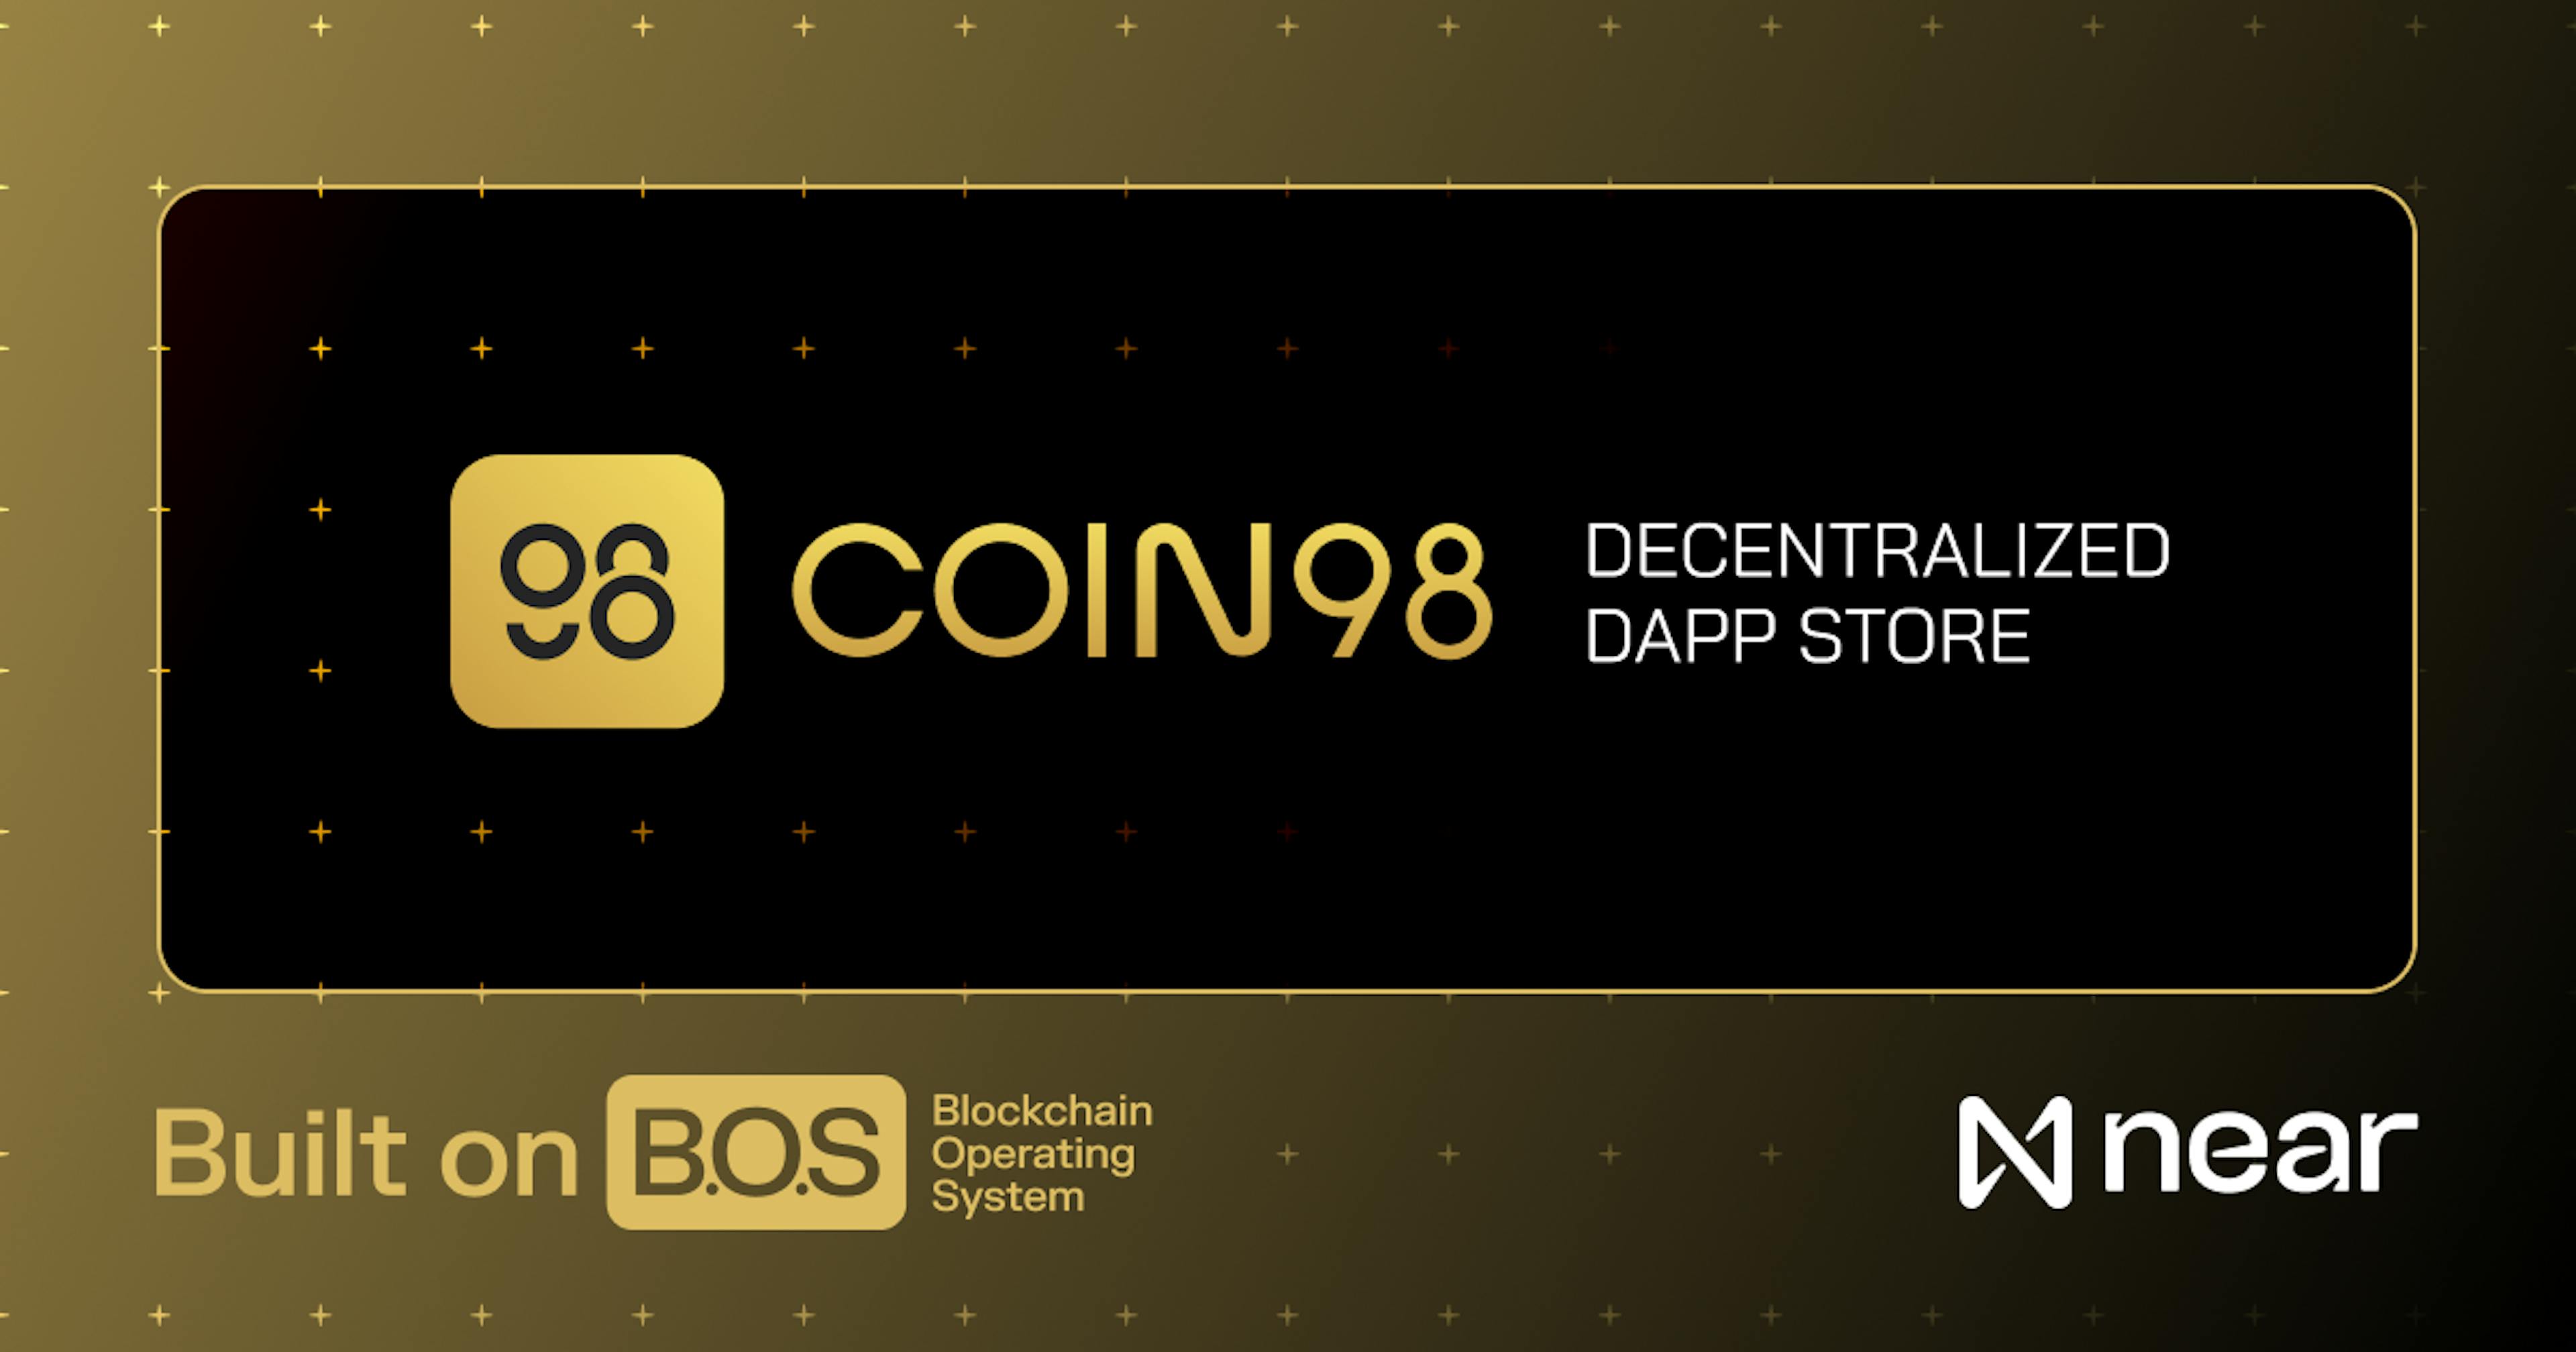 featured image - Coin98 Launches Decentralized Dapp Store on NEAR’s
Blockchain Operating System